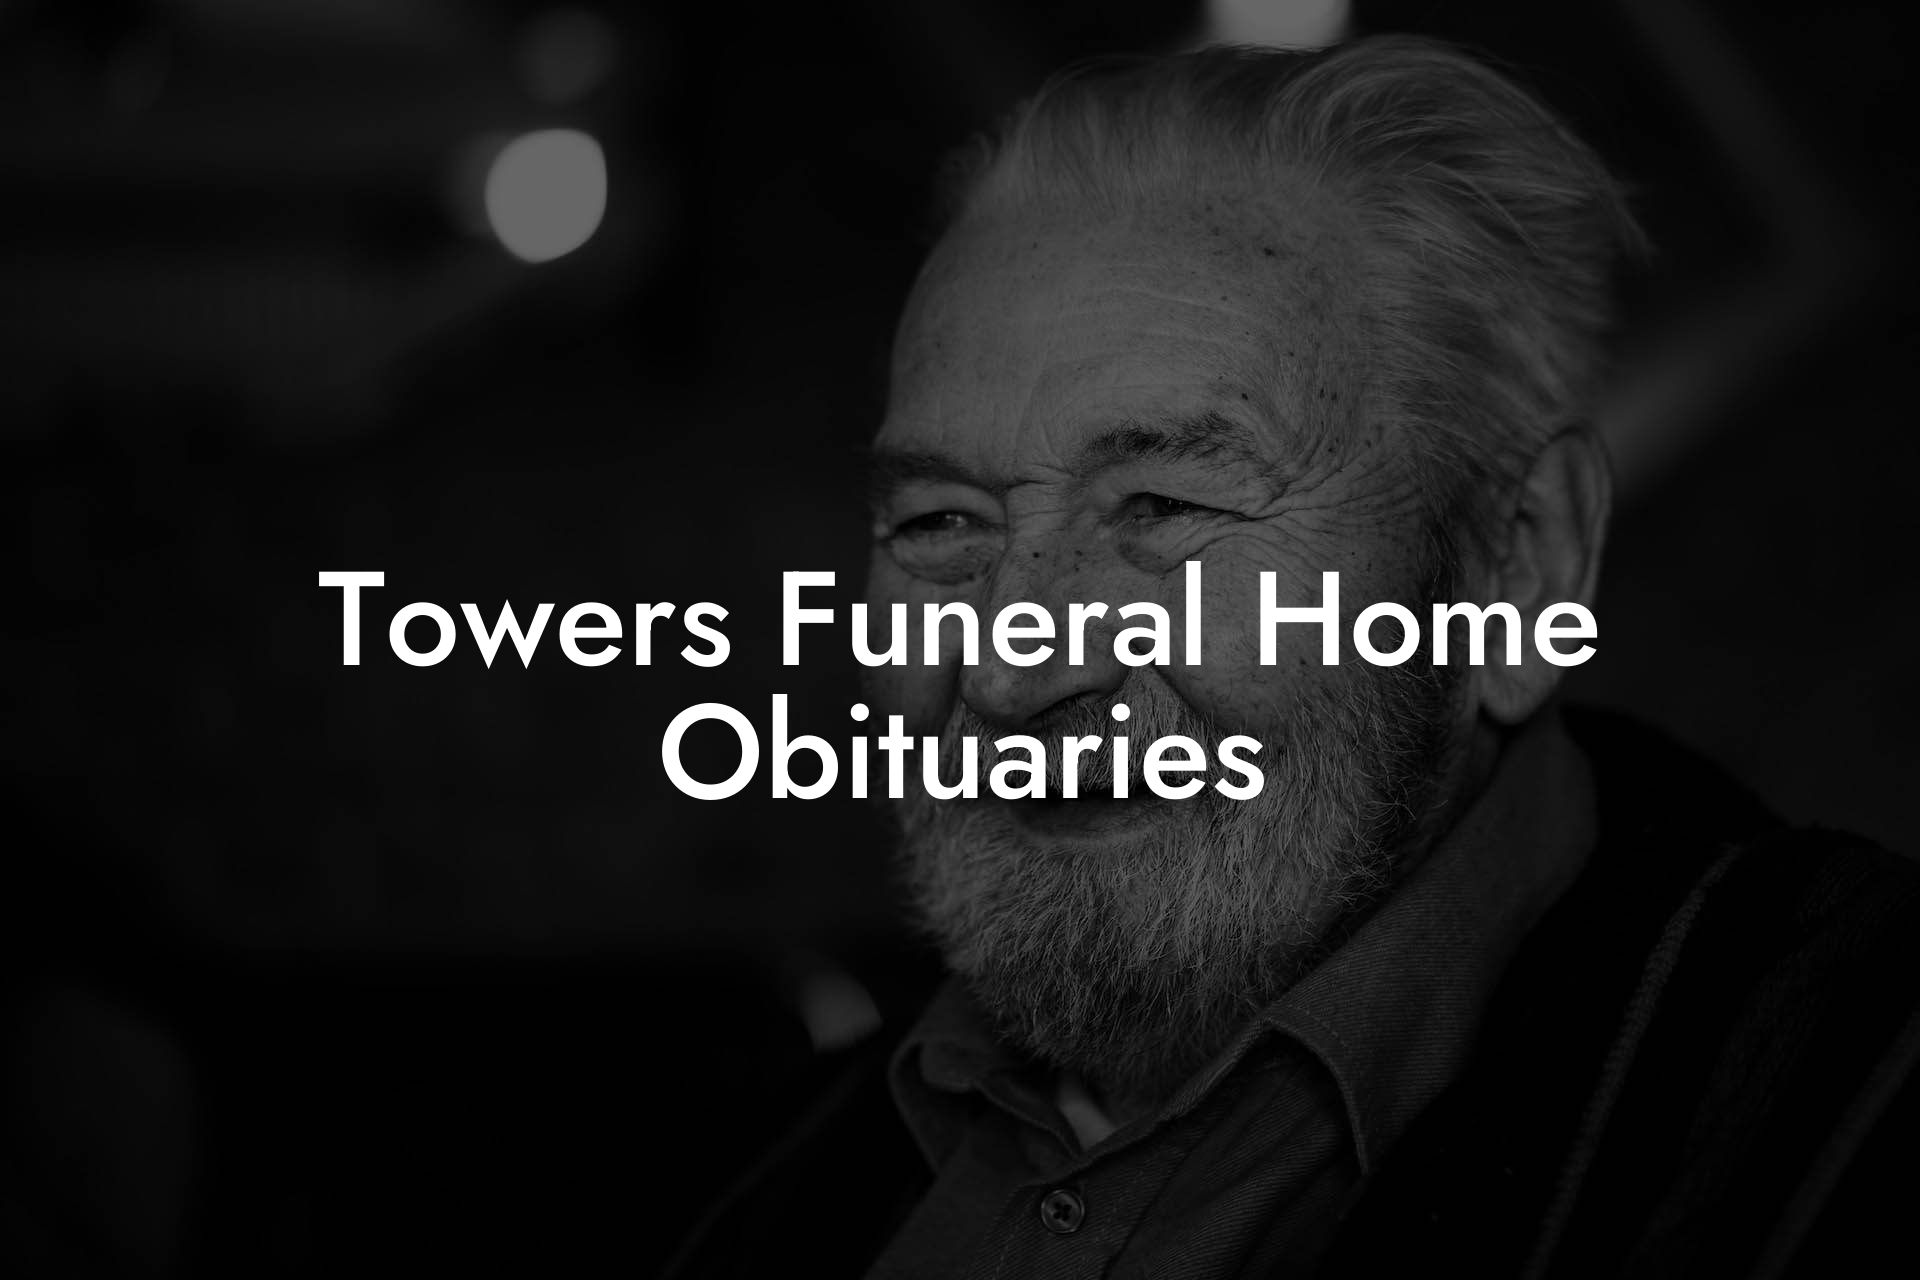 Towers Funeral Home Obituaries